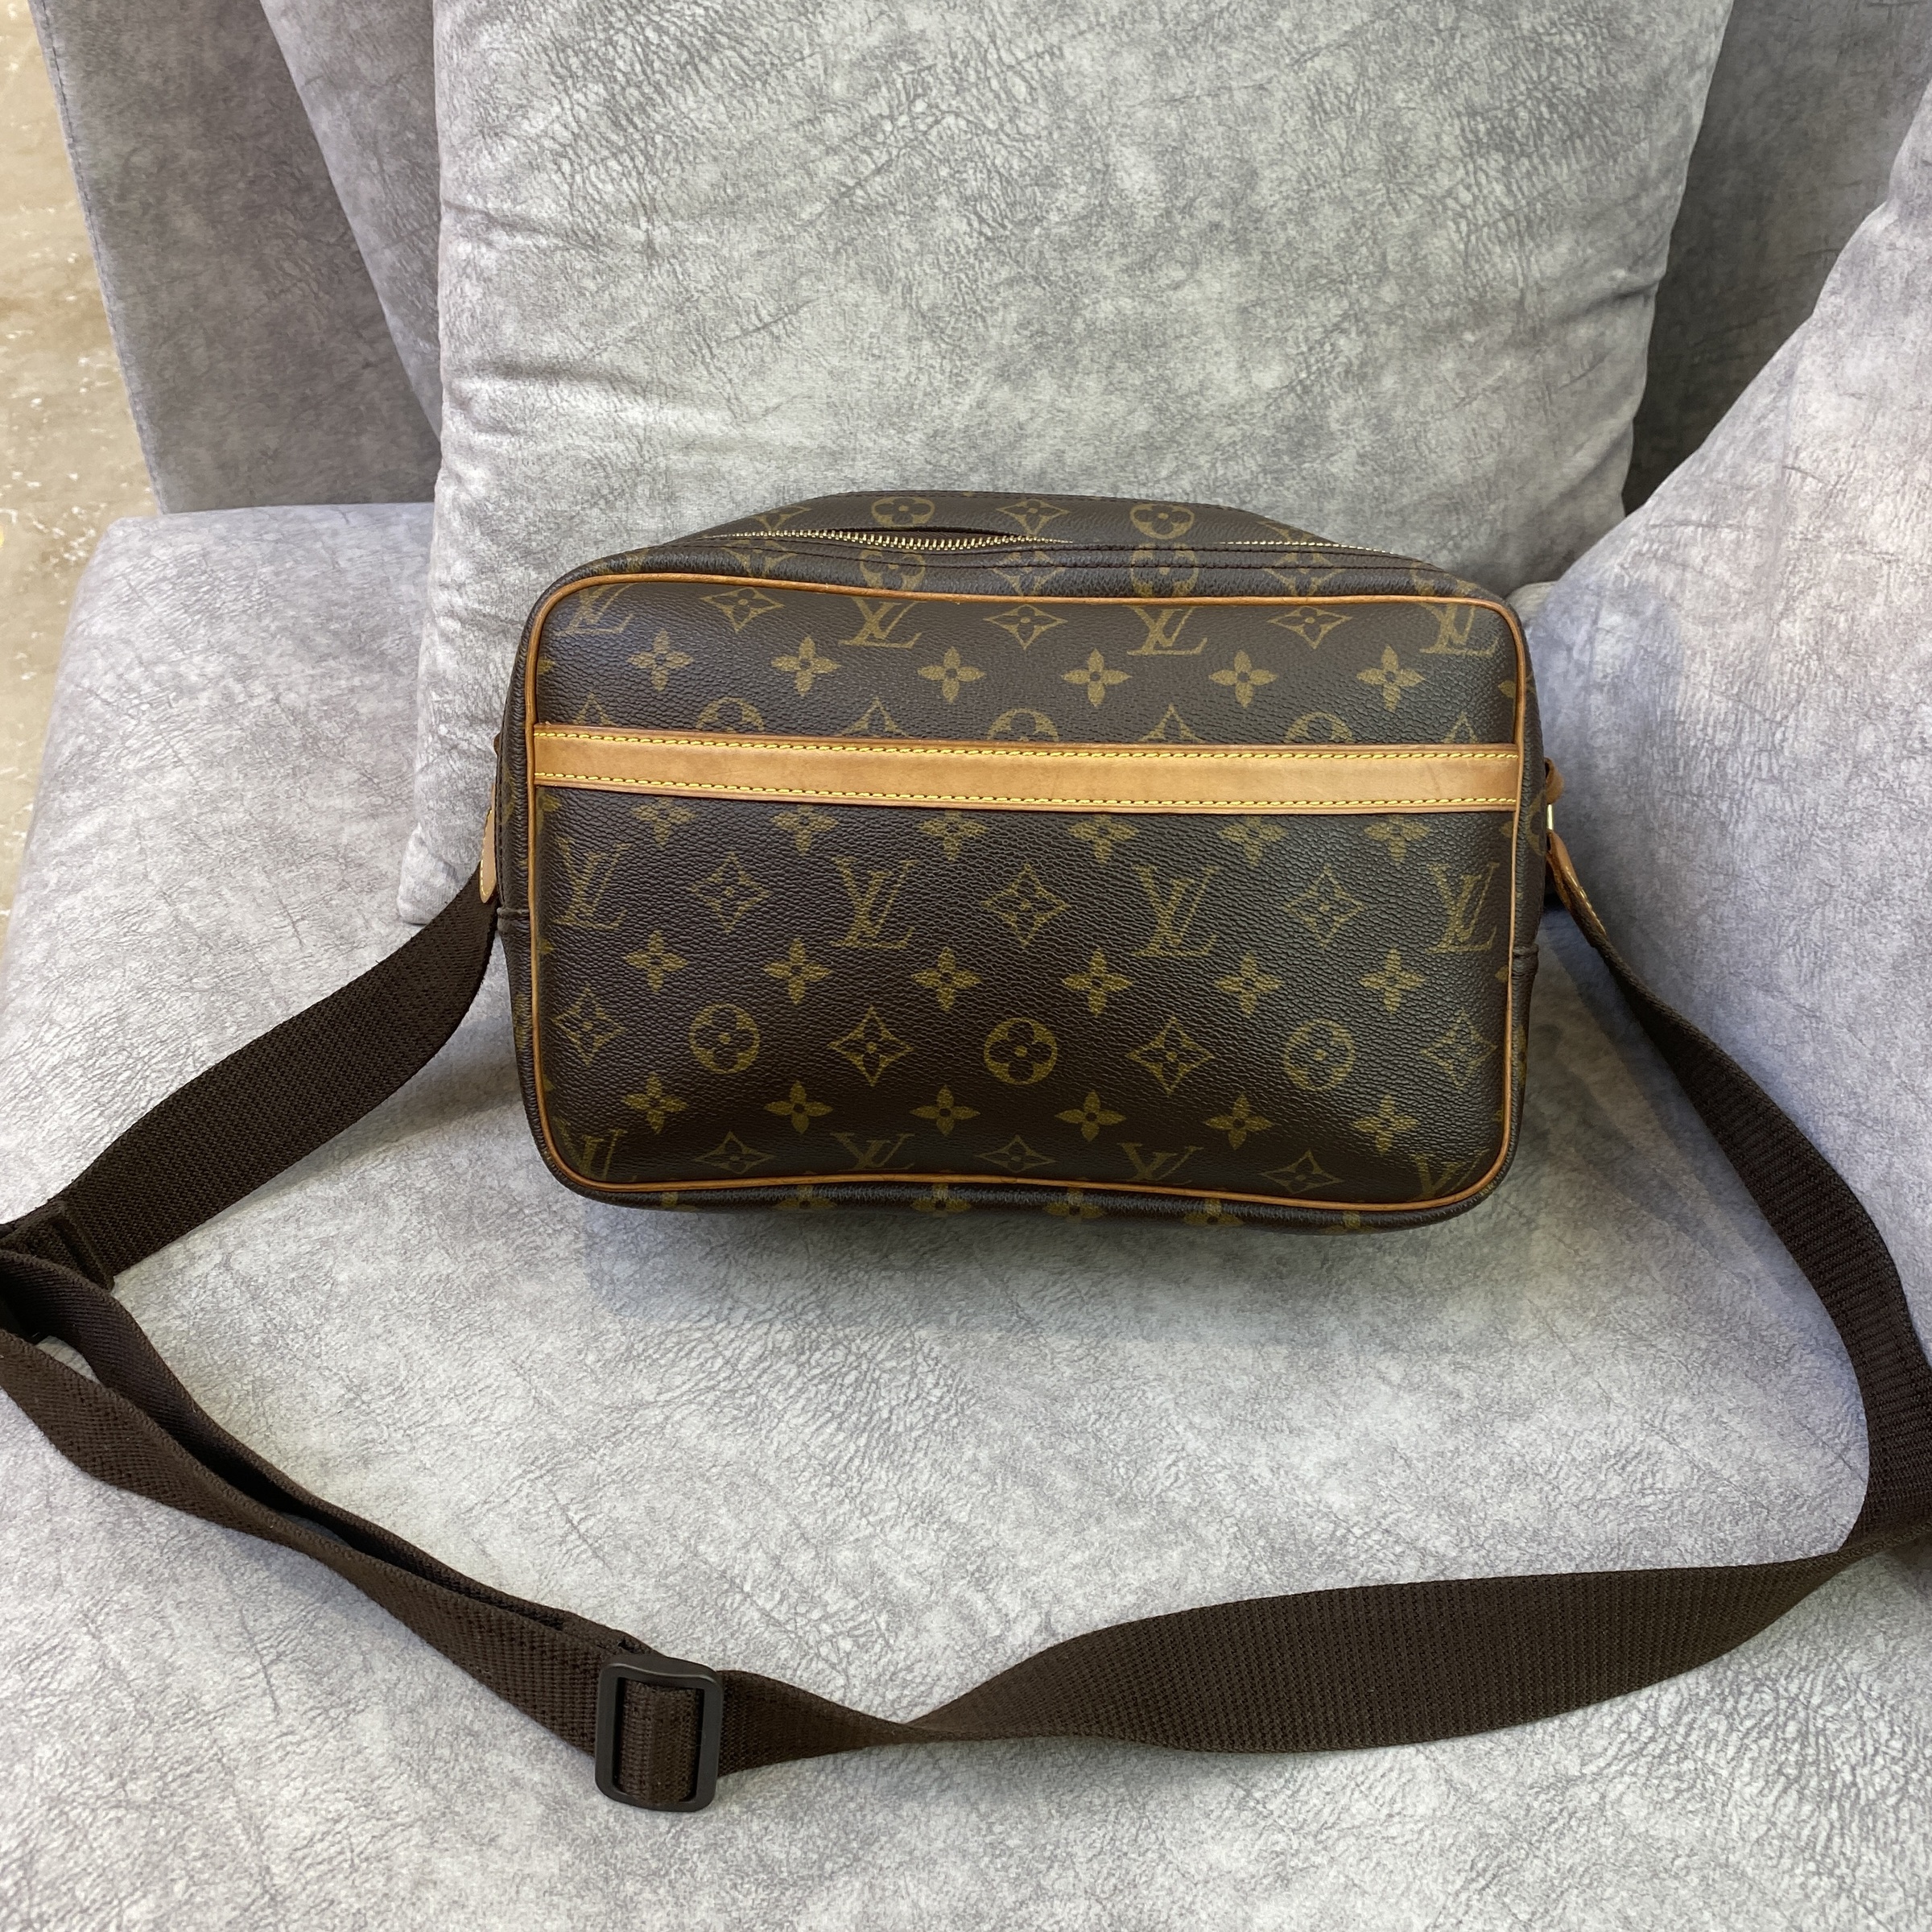 JUST IN!!!!! ❤️ previously owned louis vuitton odeon GM $1100 (1